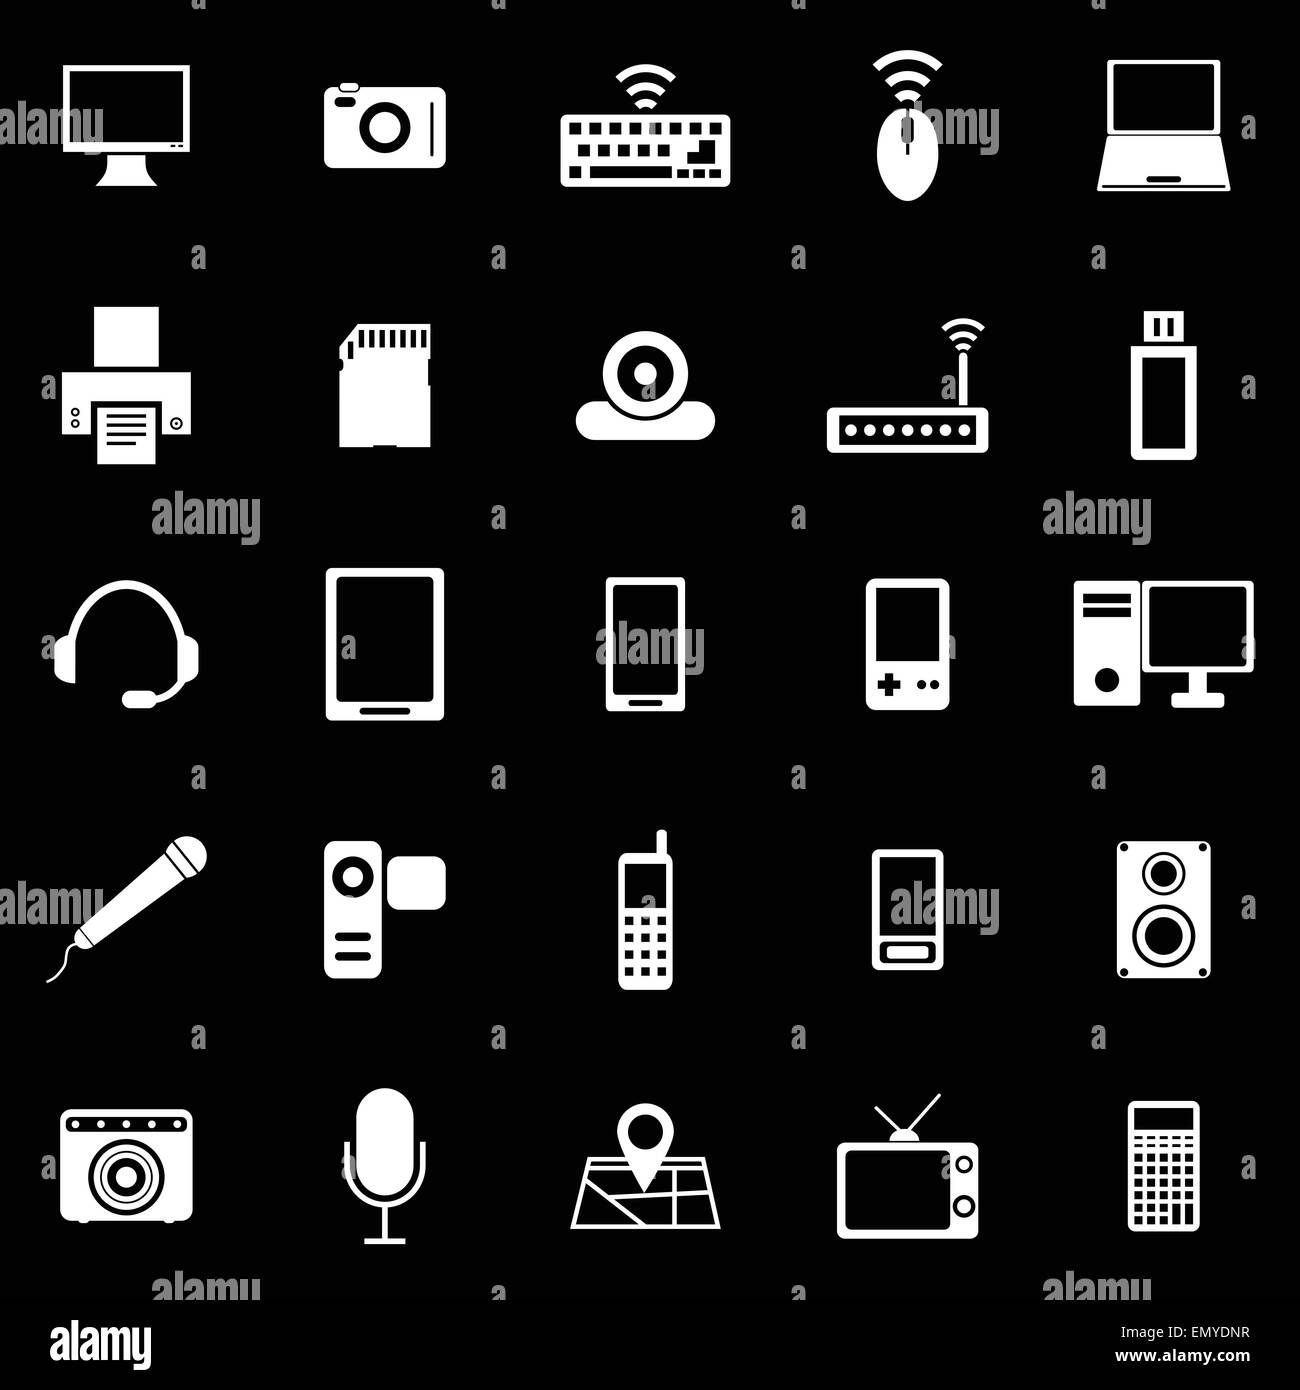 Gadget icons on black background, stock vector Stock Vector